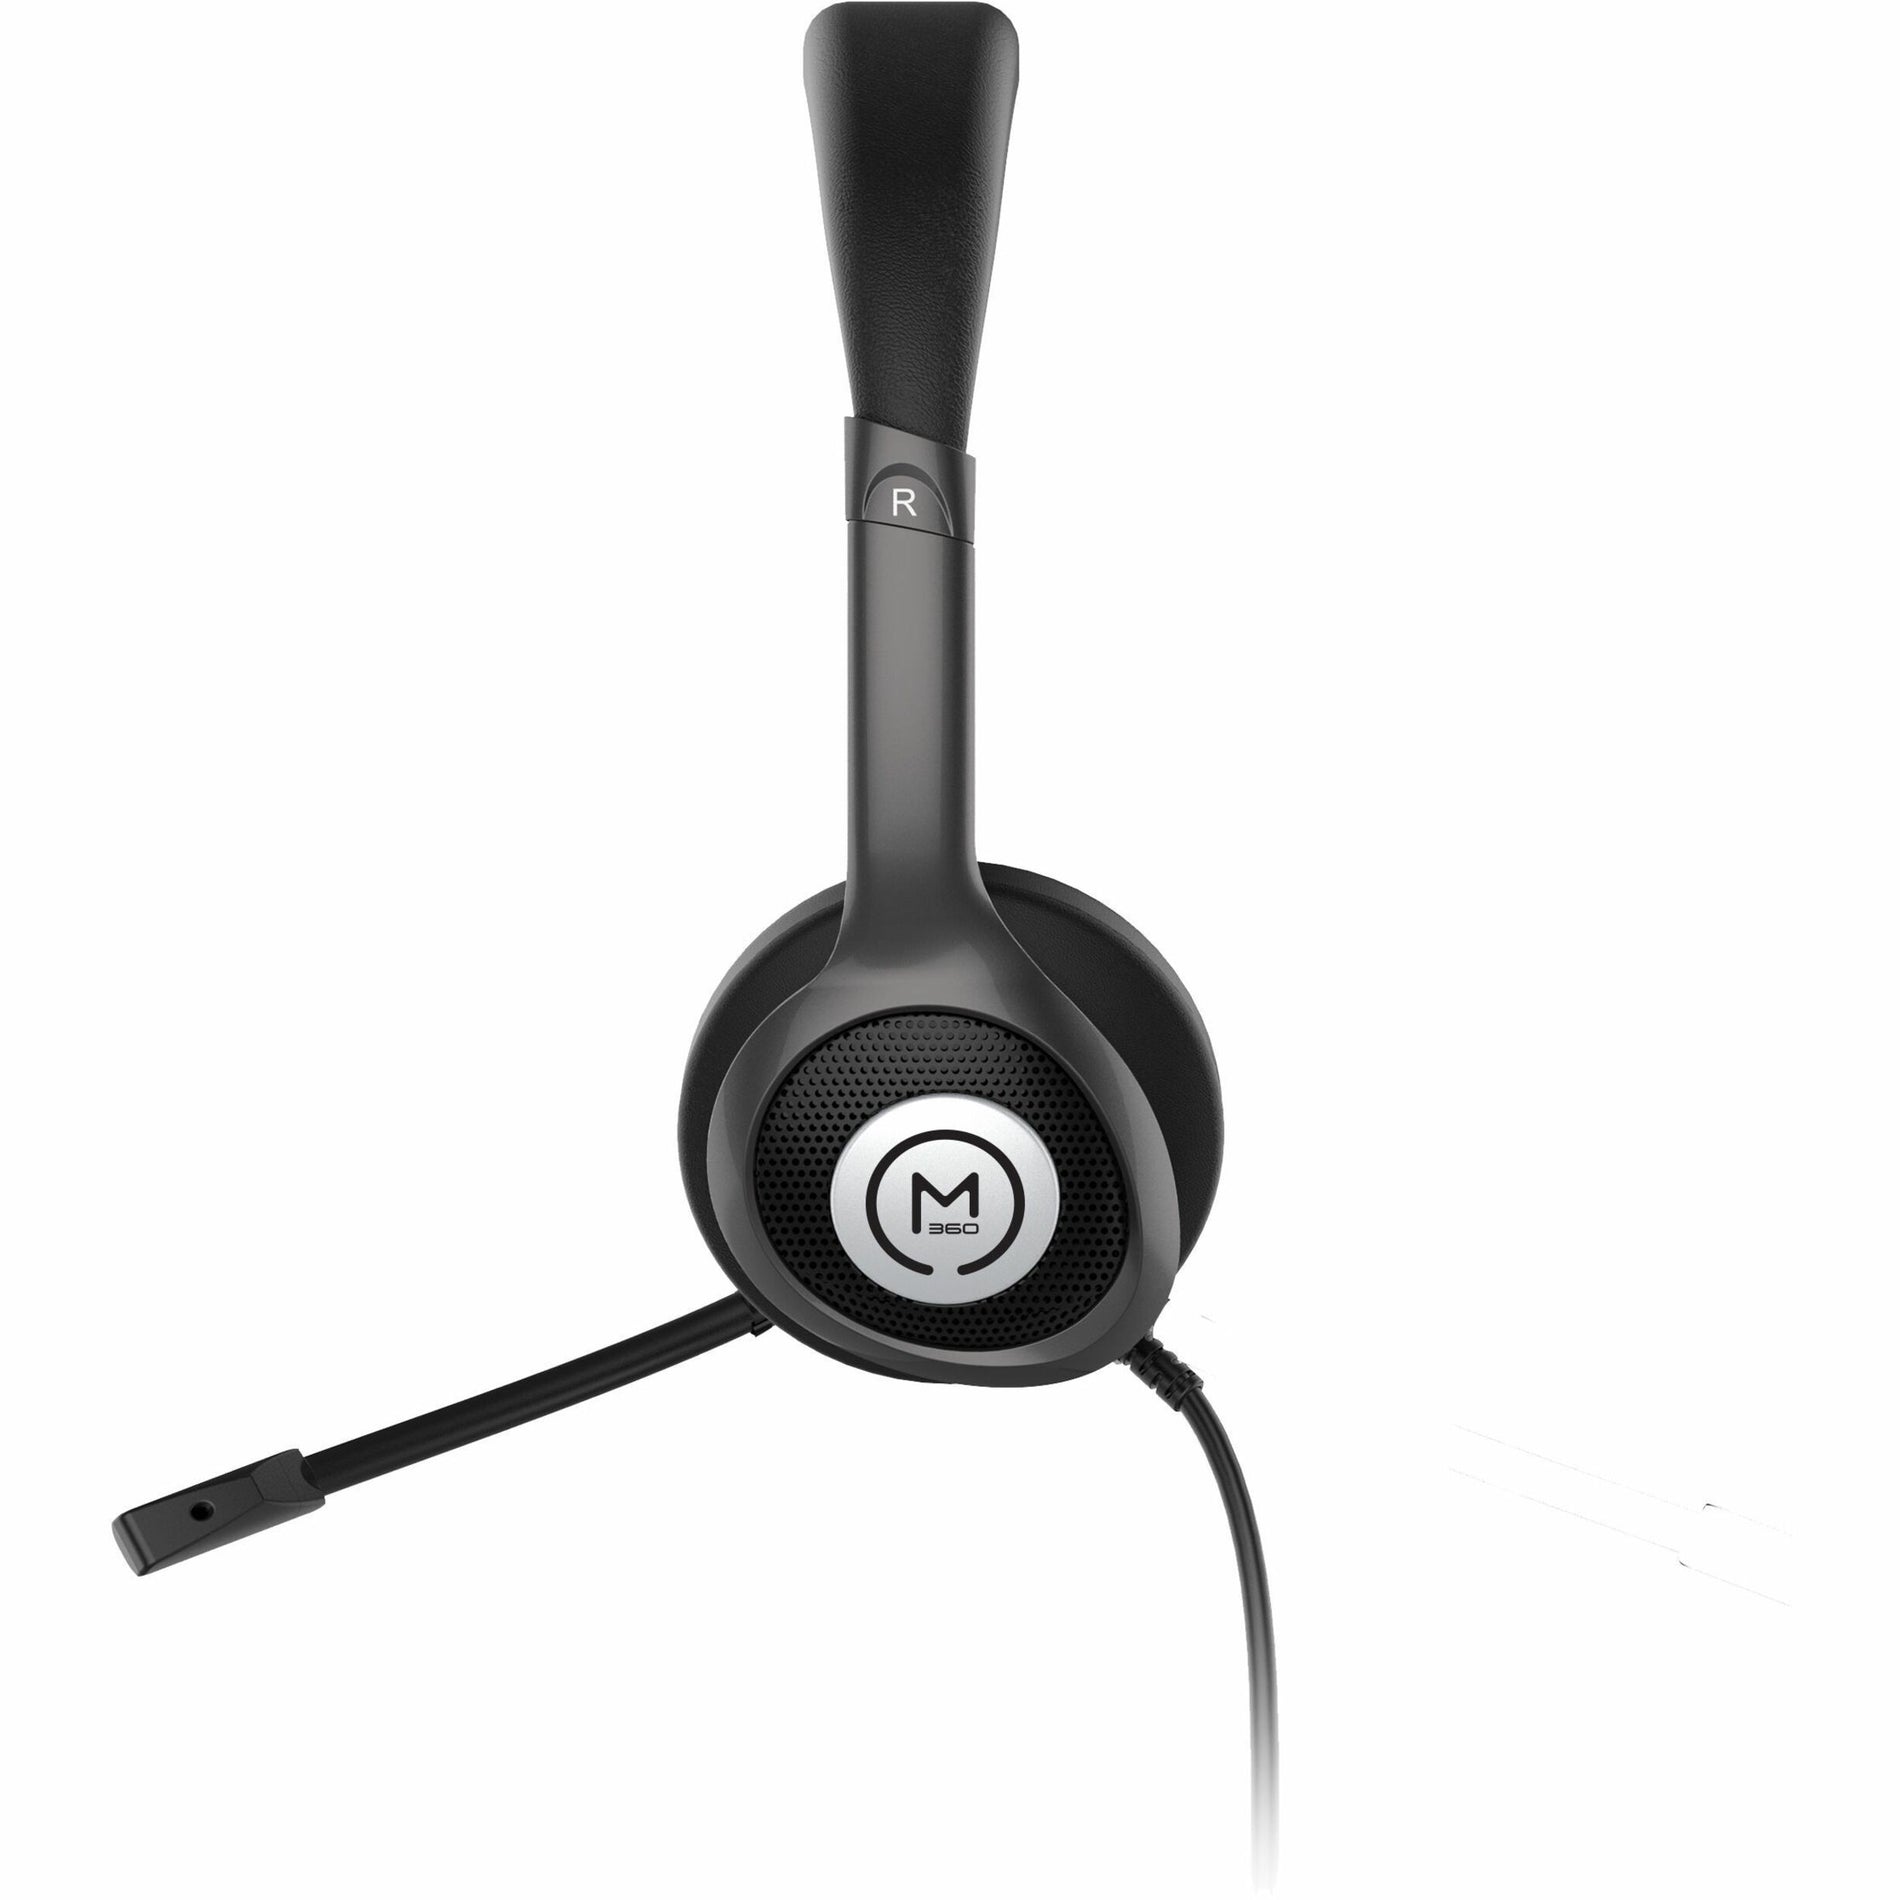 Morpheus 360 HS5600SU USB Stereo Headset with Boom Microphone, Comfortable, Plug and Play, Rotating Microphone, Microphone Mute, In-Line Volume Control, Lightweight